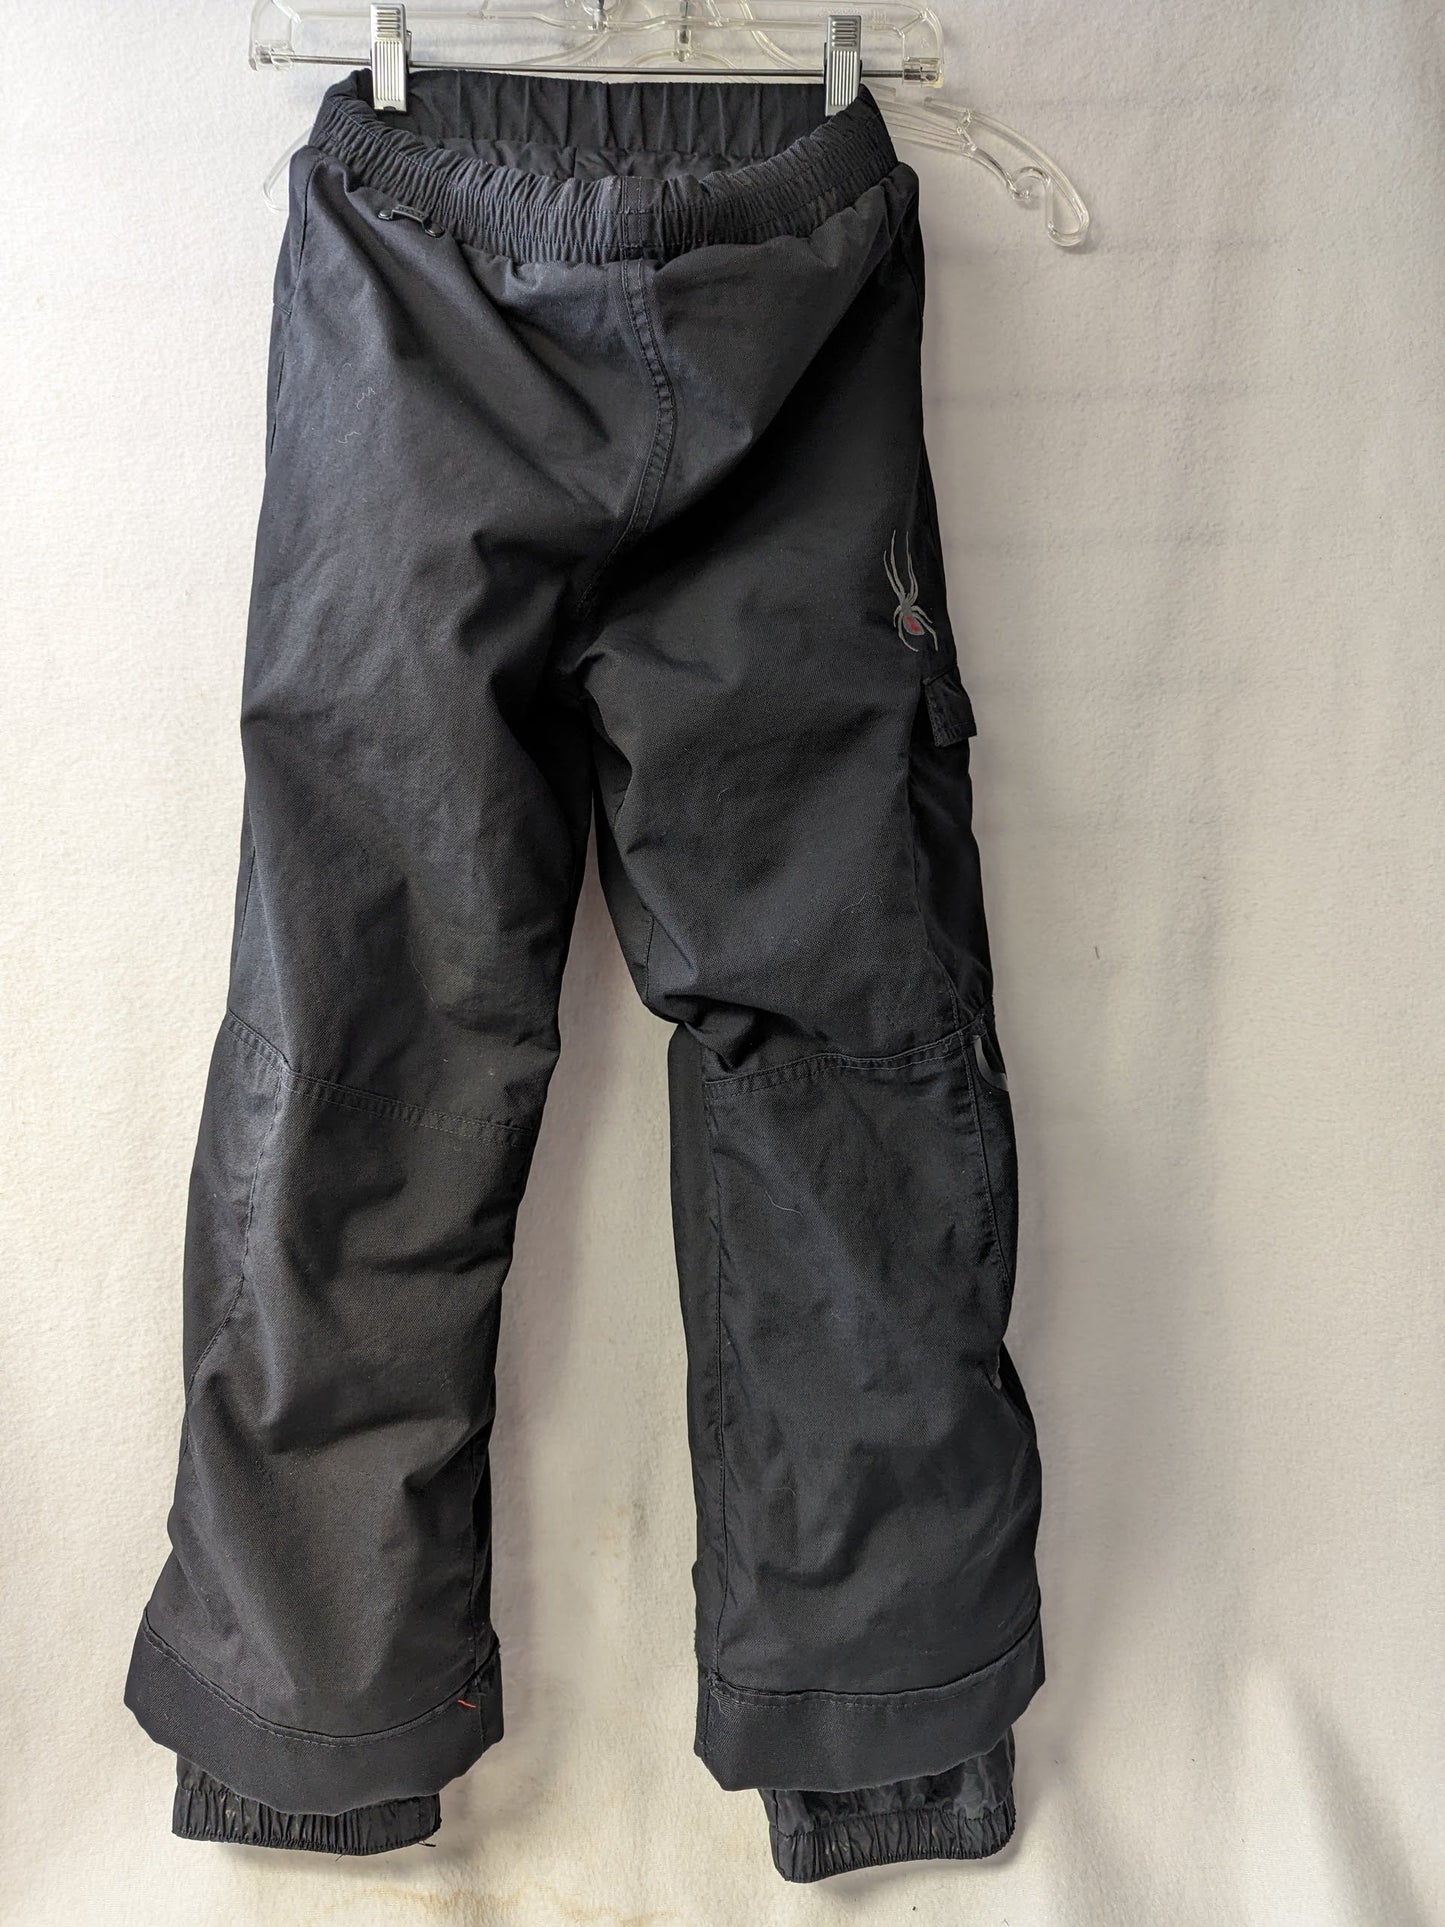 Spyder Insulated and Lined Youth Ski/Snowboard Pants Size Youth Medium 8 Color Black Condition Used